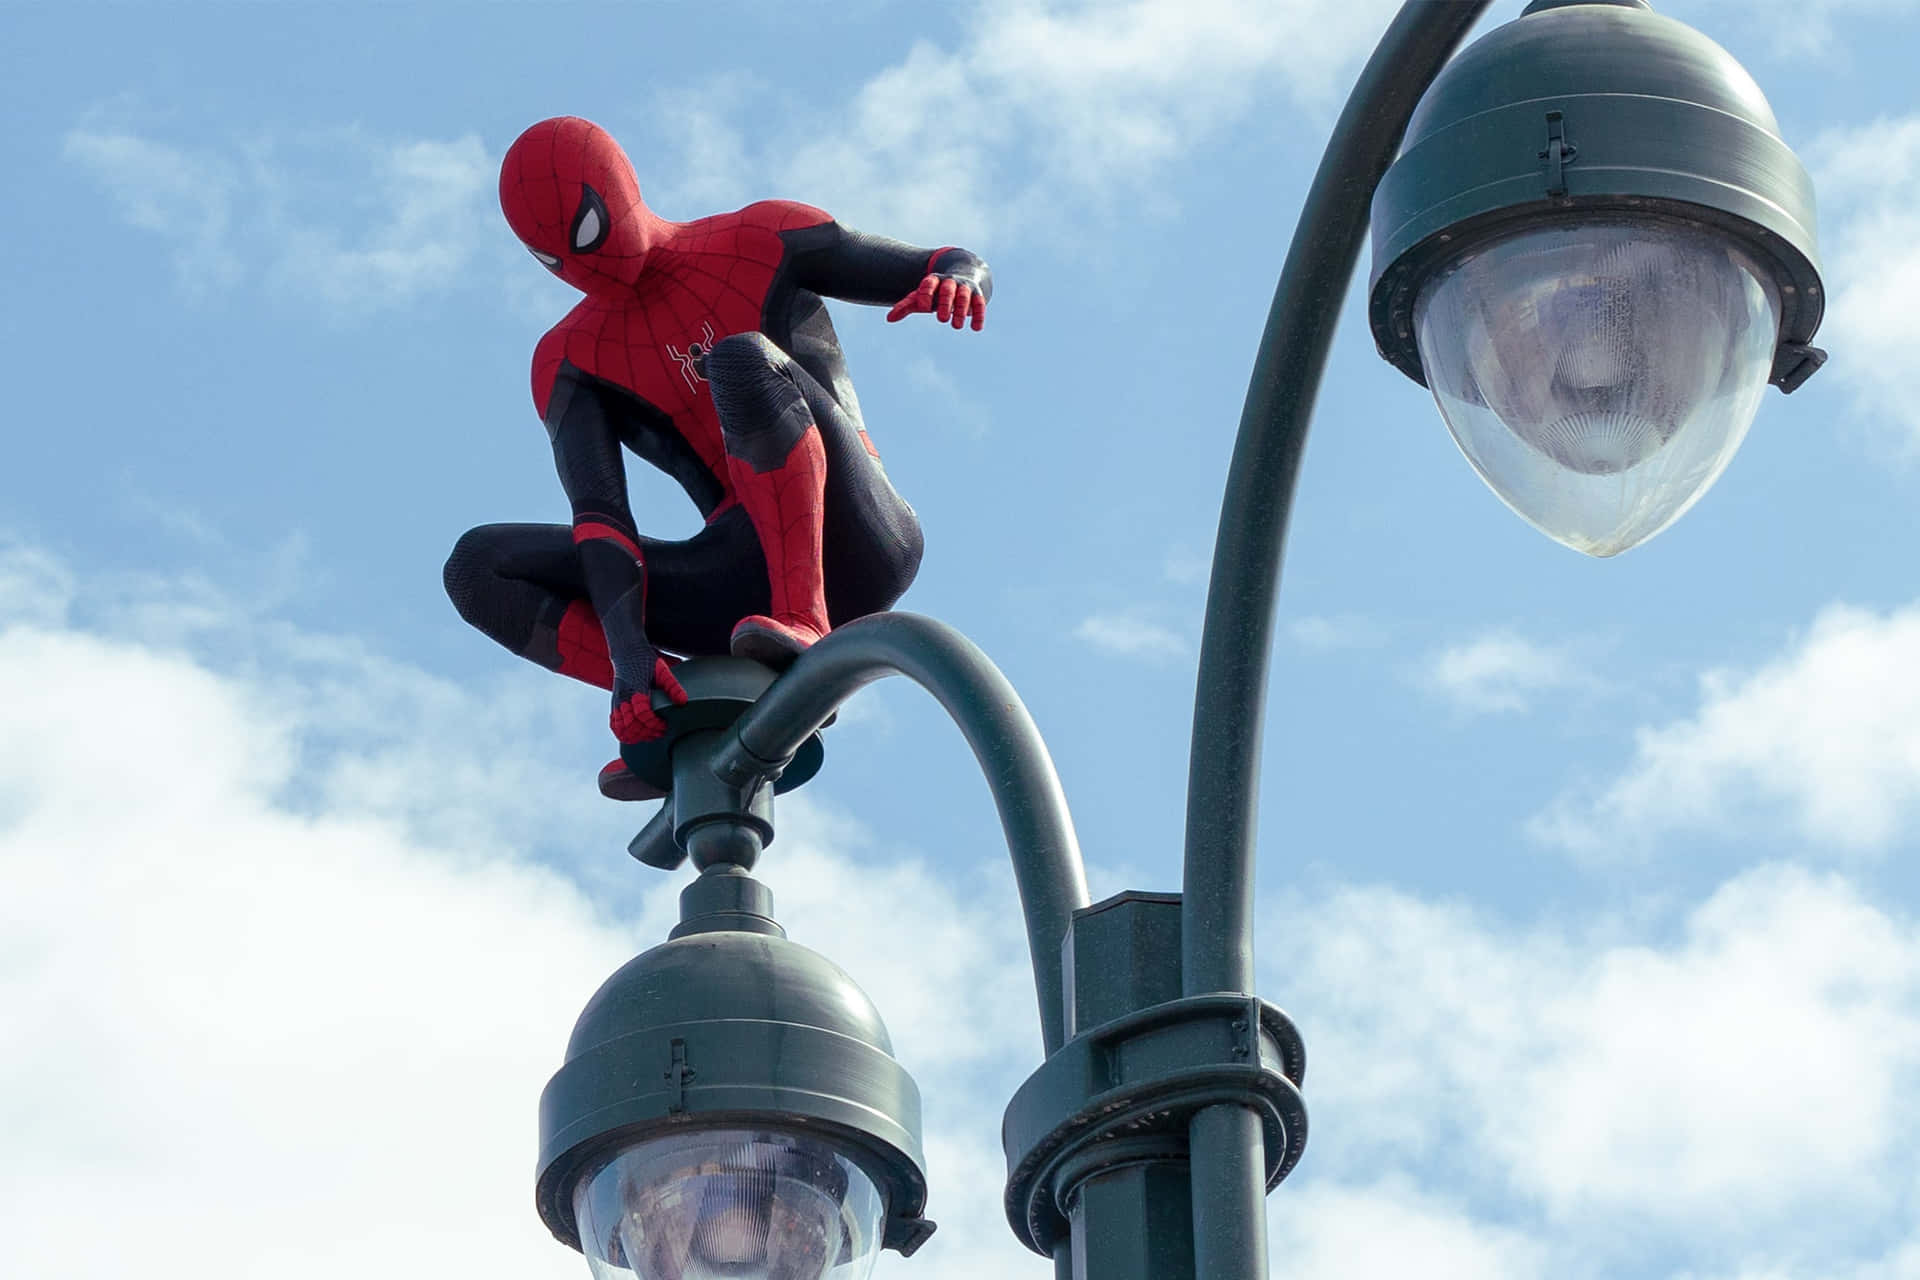 Spider Man is back in the thrilling new movie, Spider Man: No Way Home